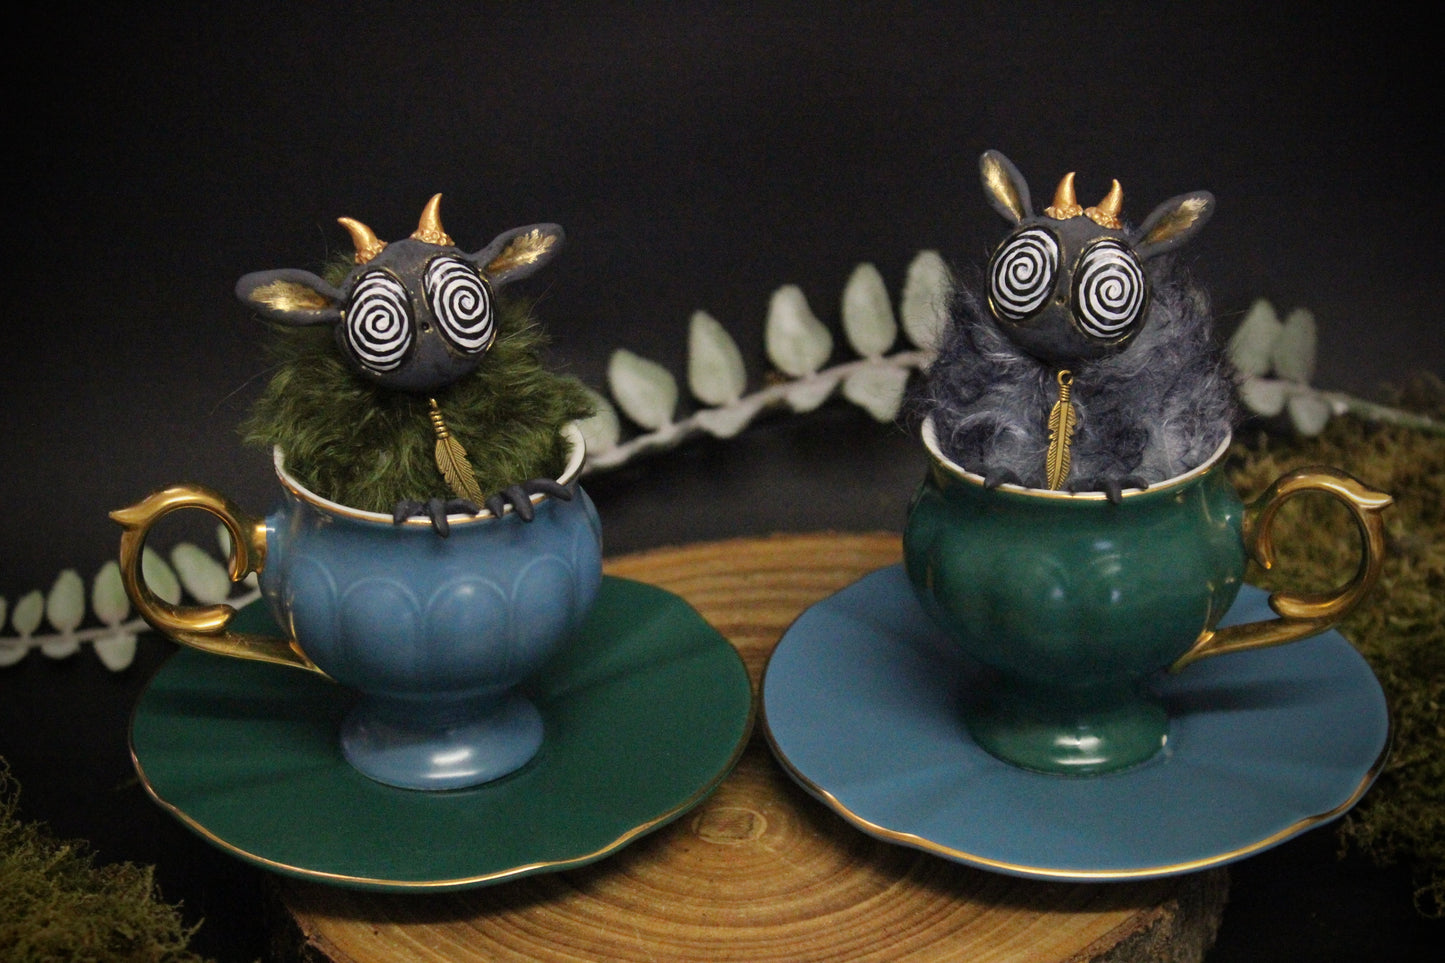 Bettie and Beryl the Teacup Critters